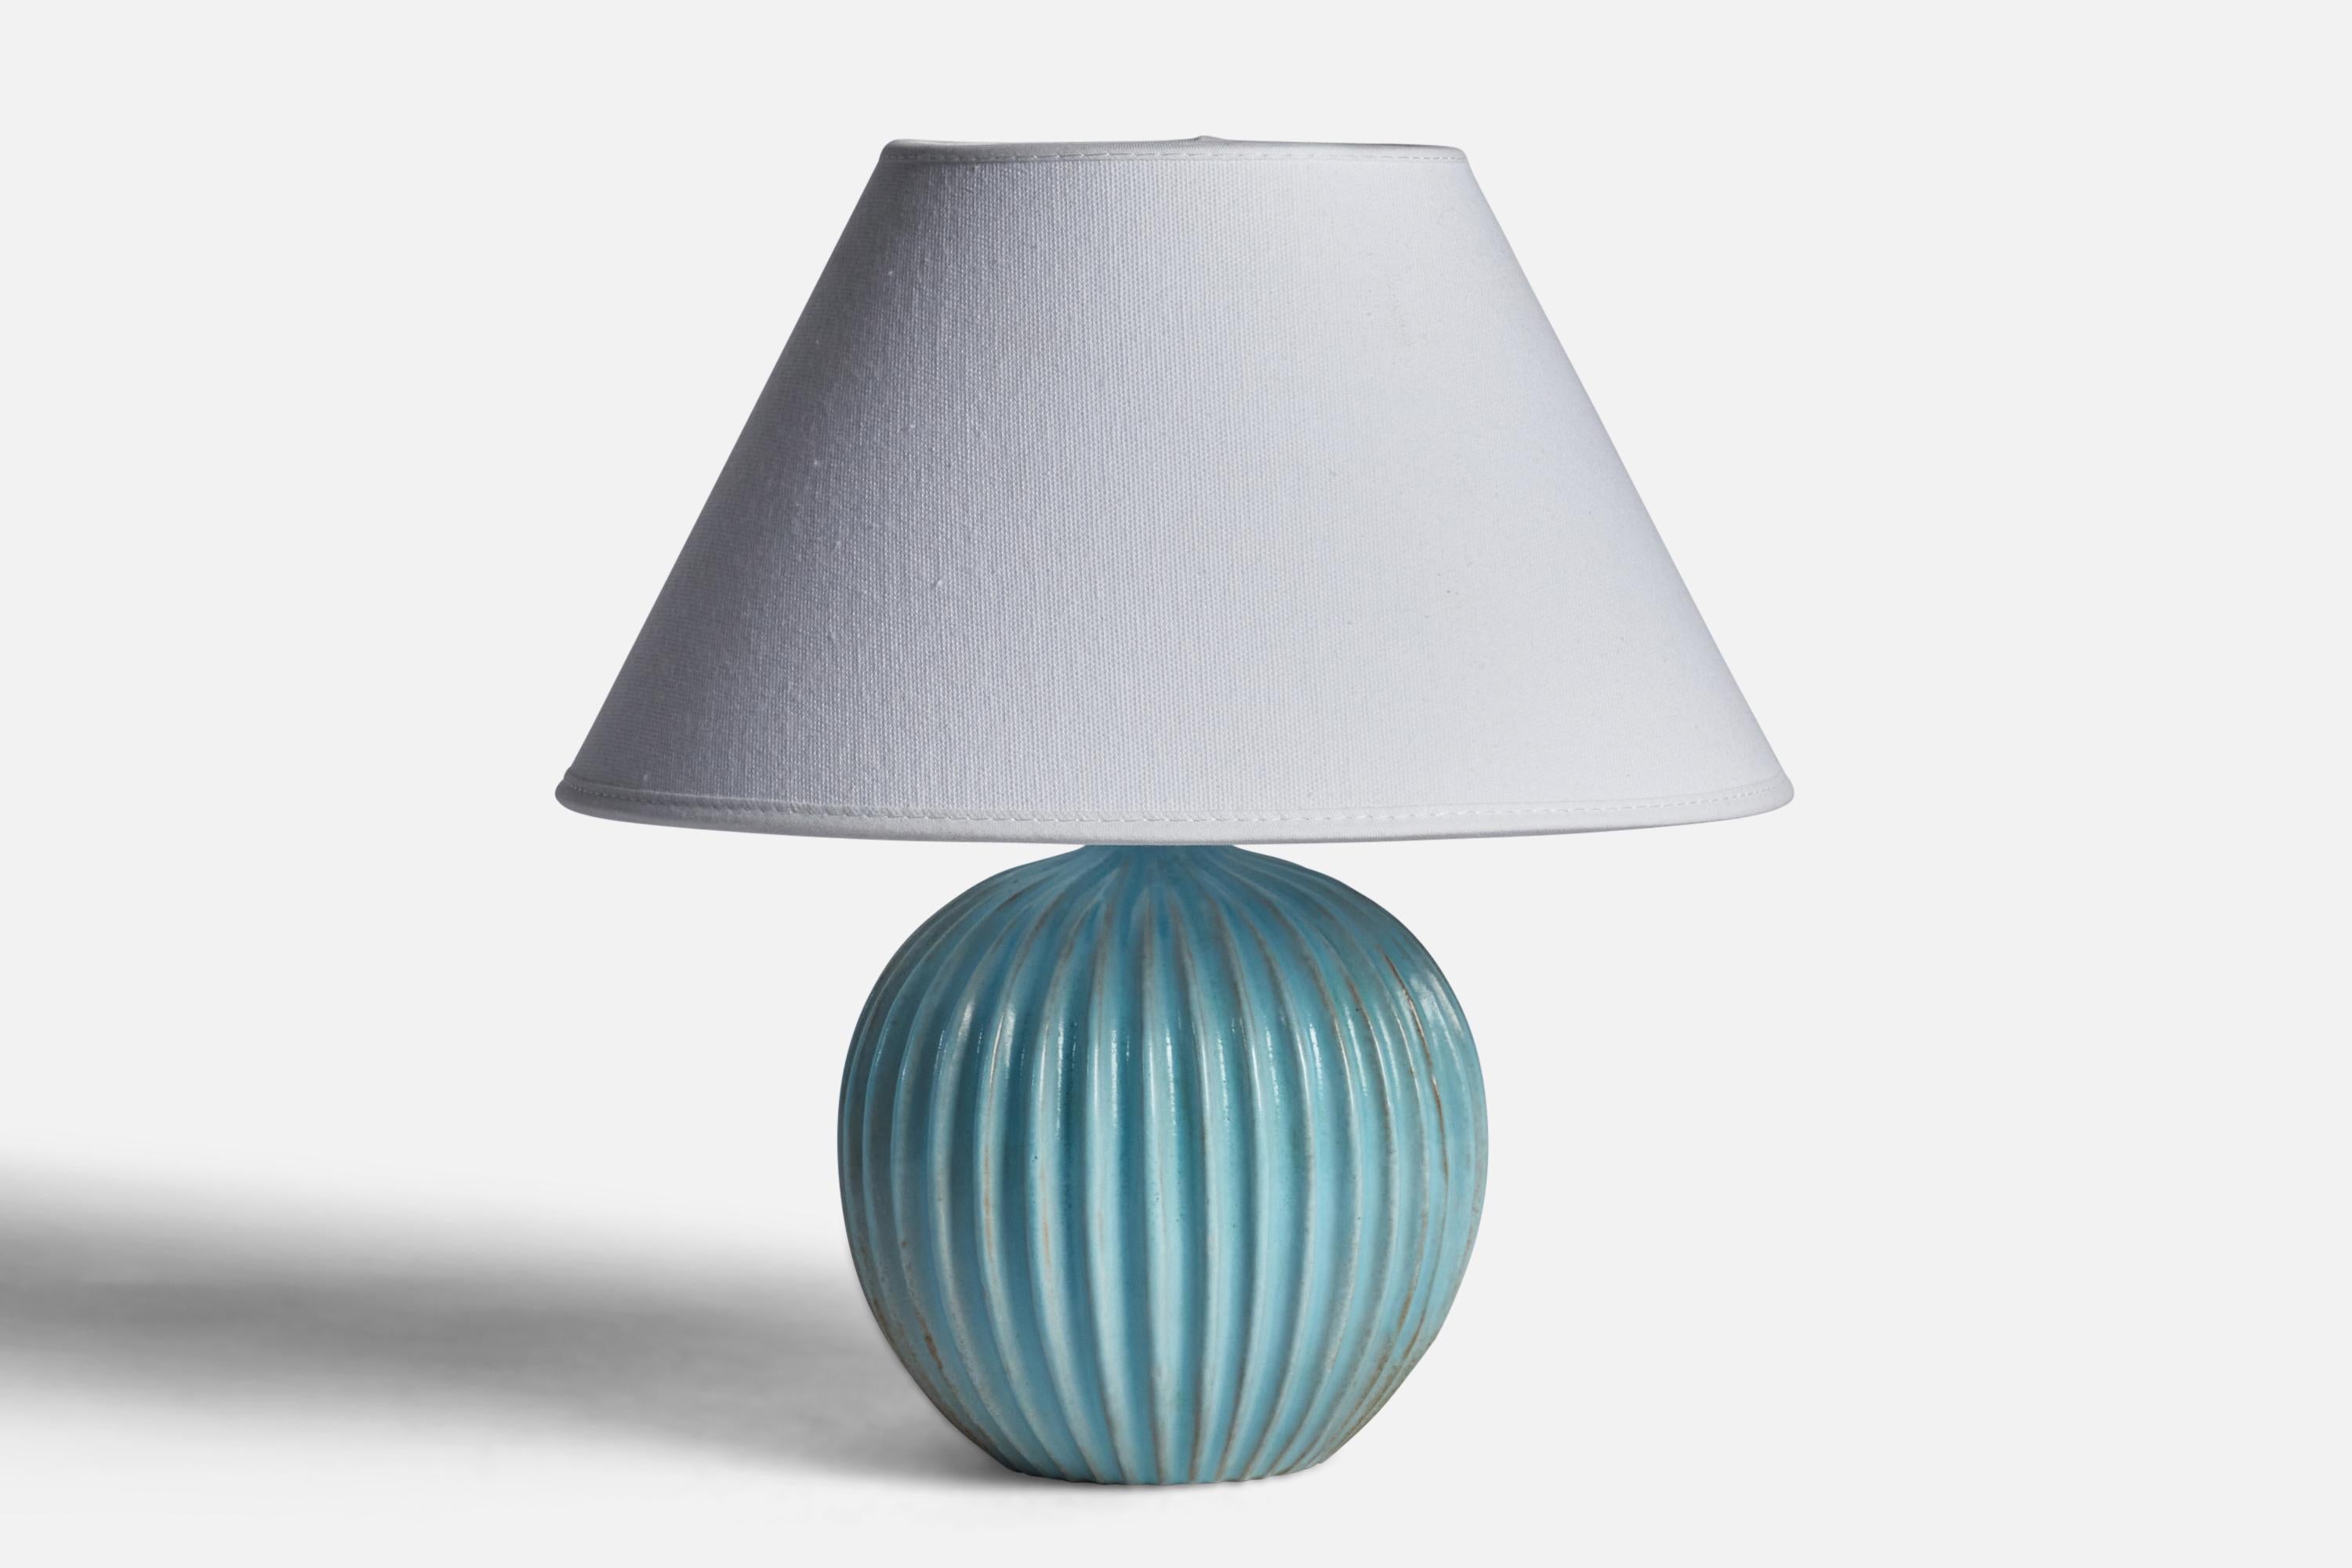 A light blue-glazed stoneware table lamp designed and produced by Christian Schollert, Denmark, c. 1960s.

Dimensions of Lamp (inches): 7.65” H x 5.5” Diameter
Dimensions of Shade (inches): 4.5” Top Diameter x 10” Bottom Diameter x